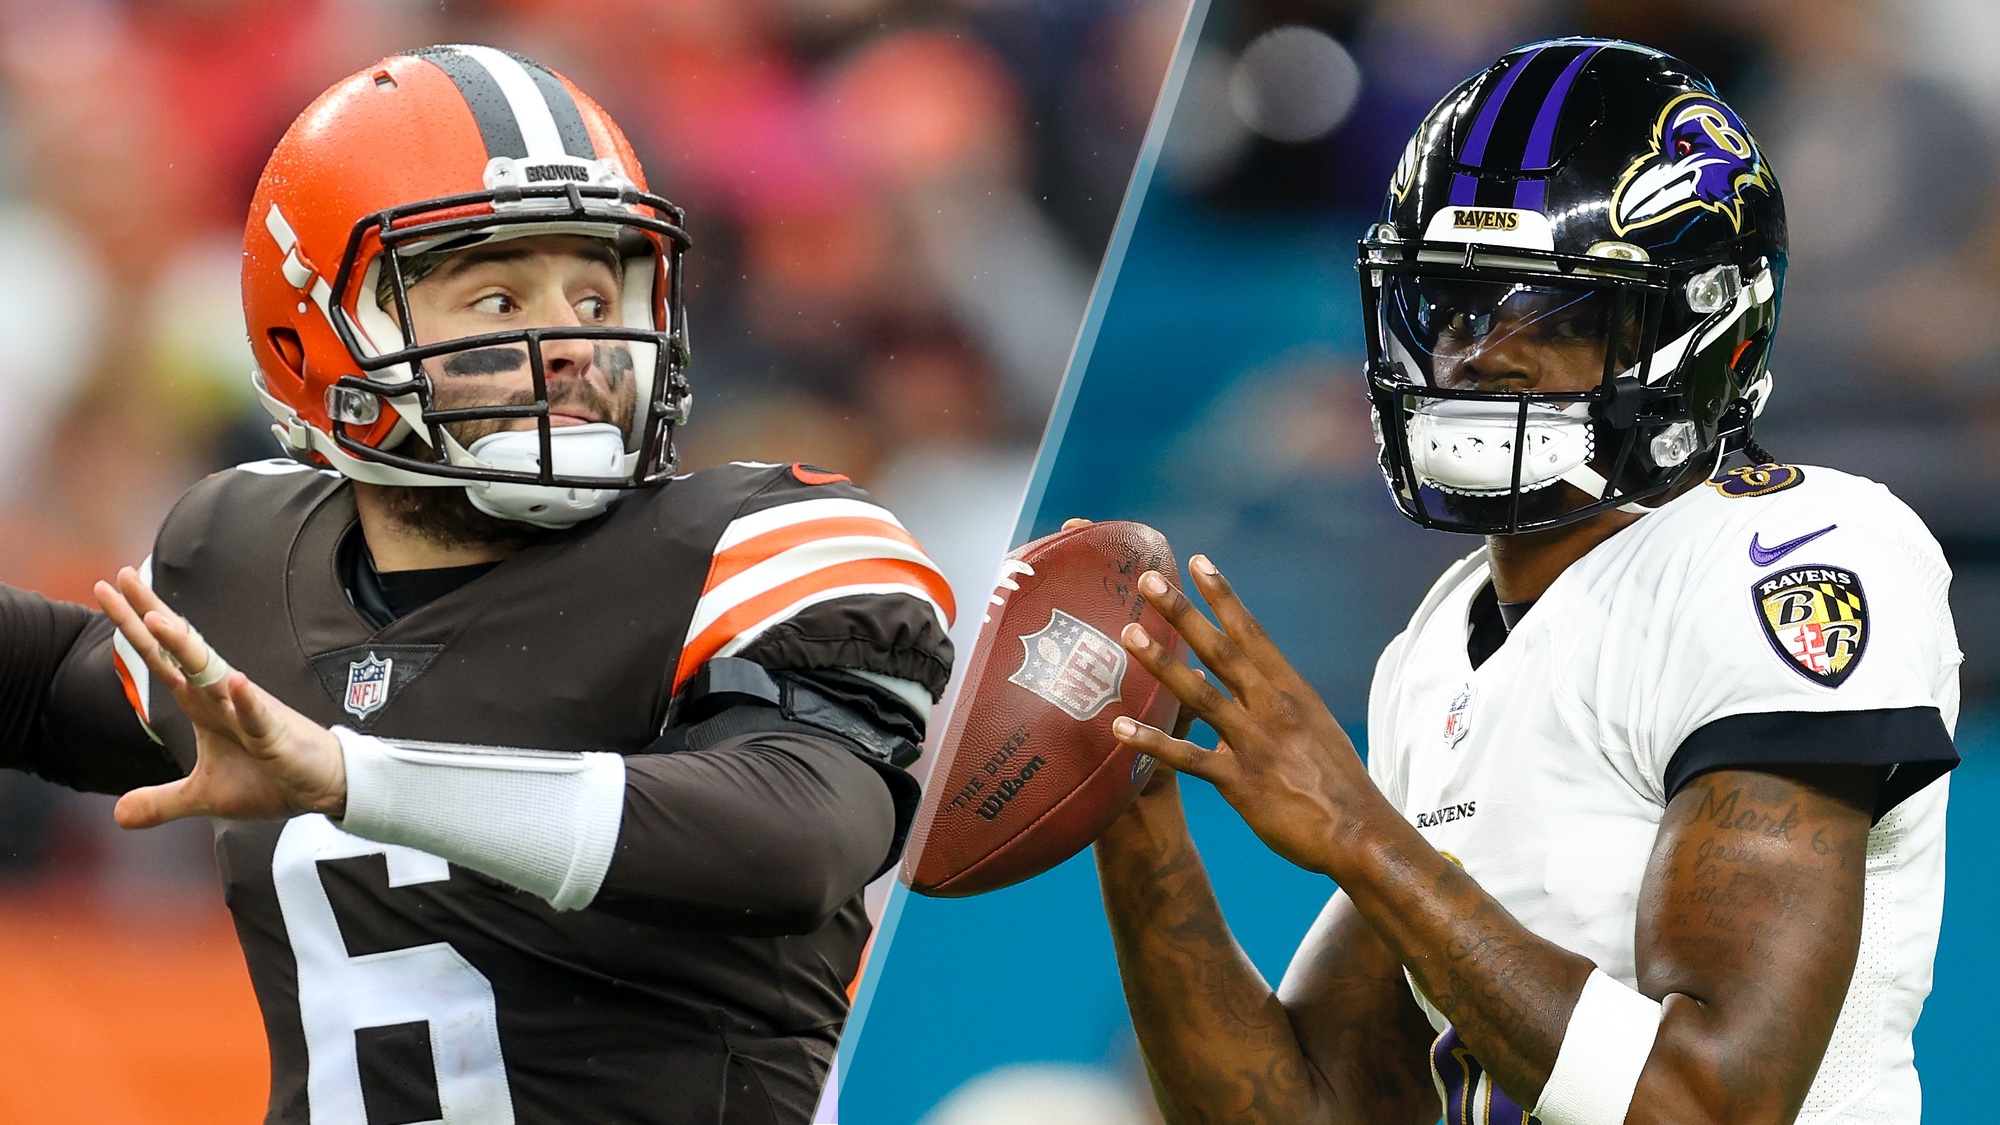 Browns vs Ravens live stream is tonight: How to watch Sunday Night